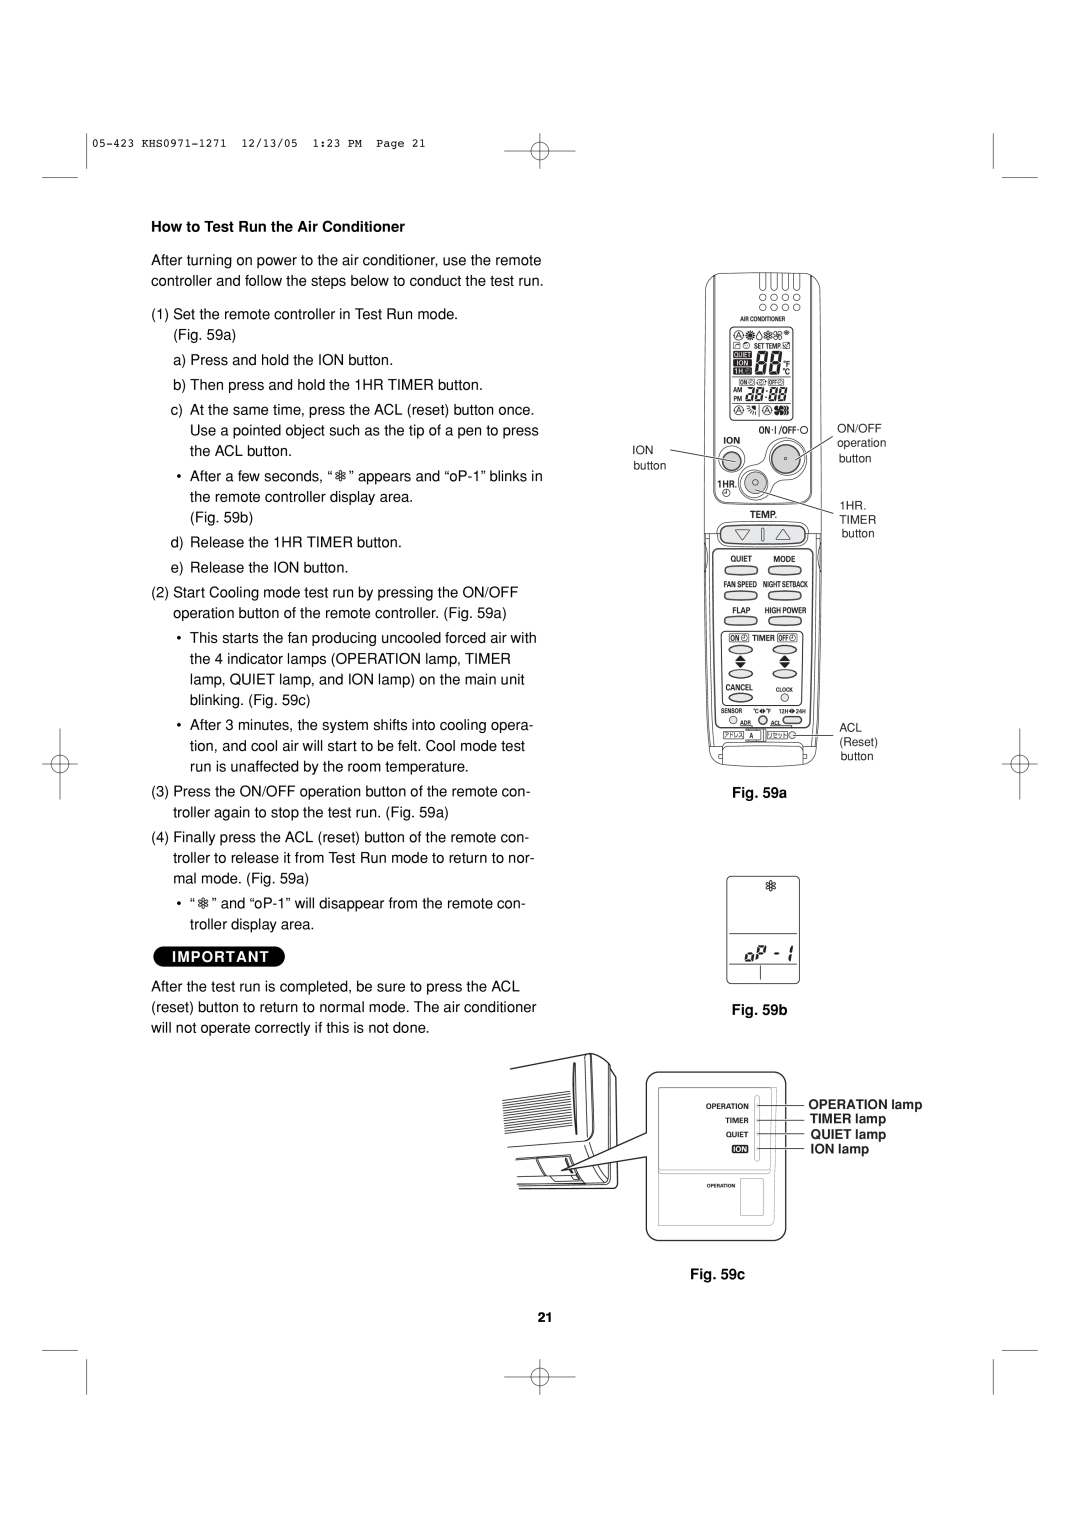 Sanyo 8.53E+13 installation instructions How to Test Run the Air Conditioner, a b 